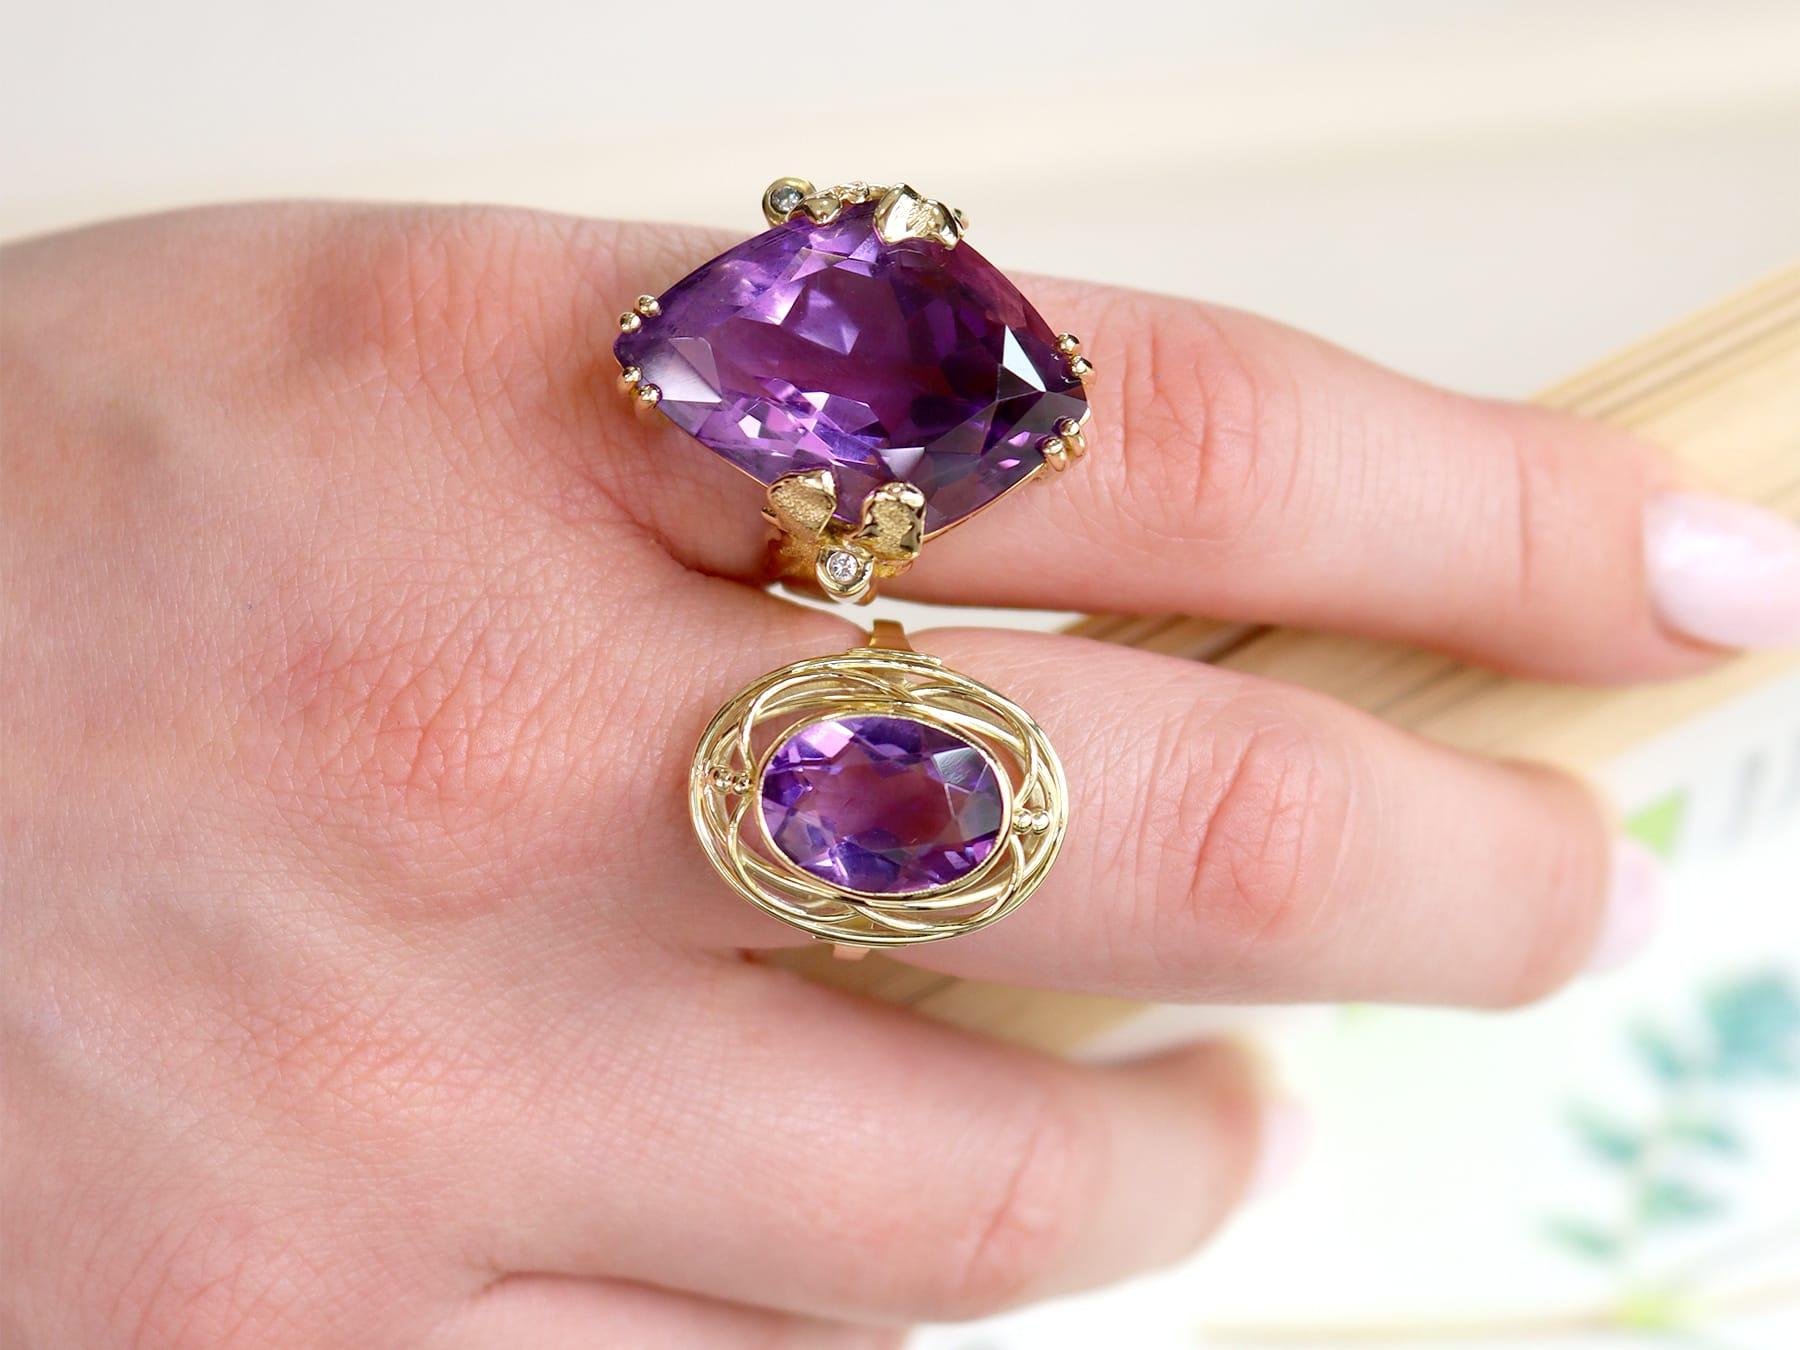 Vintage 6.91Ct Amethyst and 14k Yellow Gold Dress Ring 1940 In Excellent Condition For Sale In Jesmond, Newcastle Upon Tyne